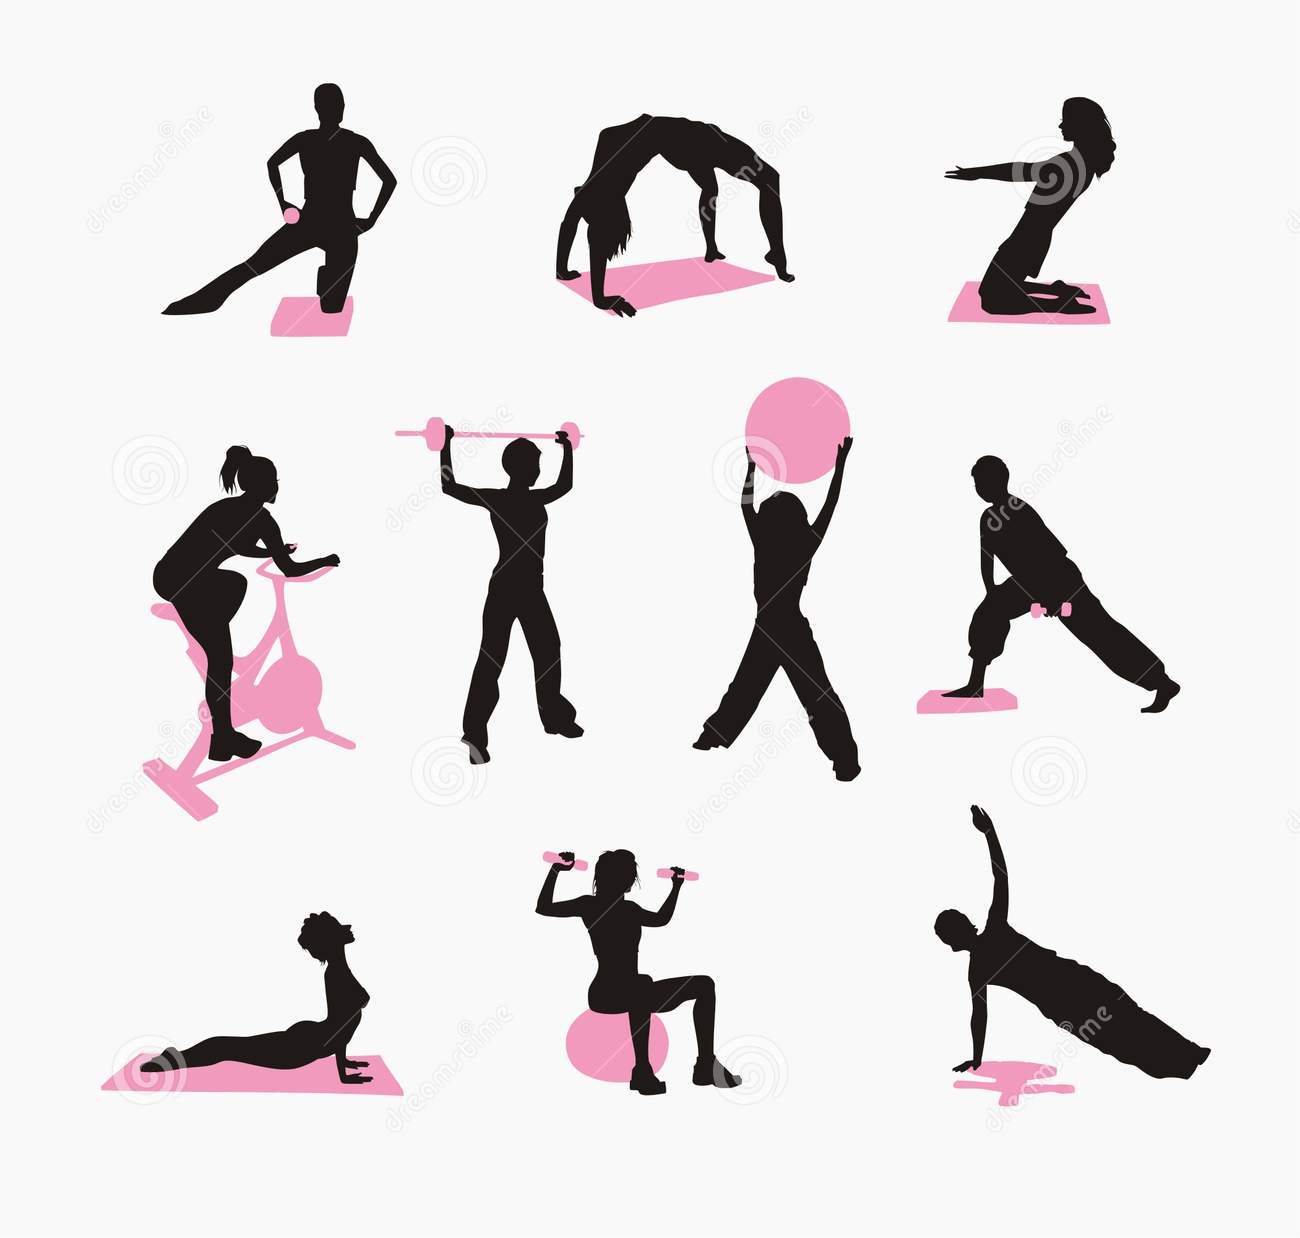 Free Exercising Cliparts, Download Free Clip Art, Free Clip